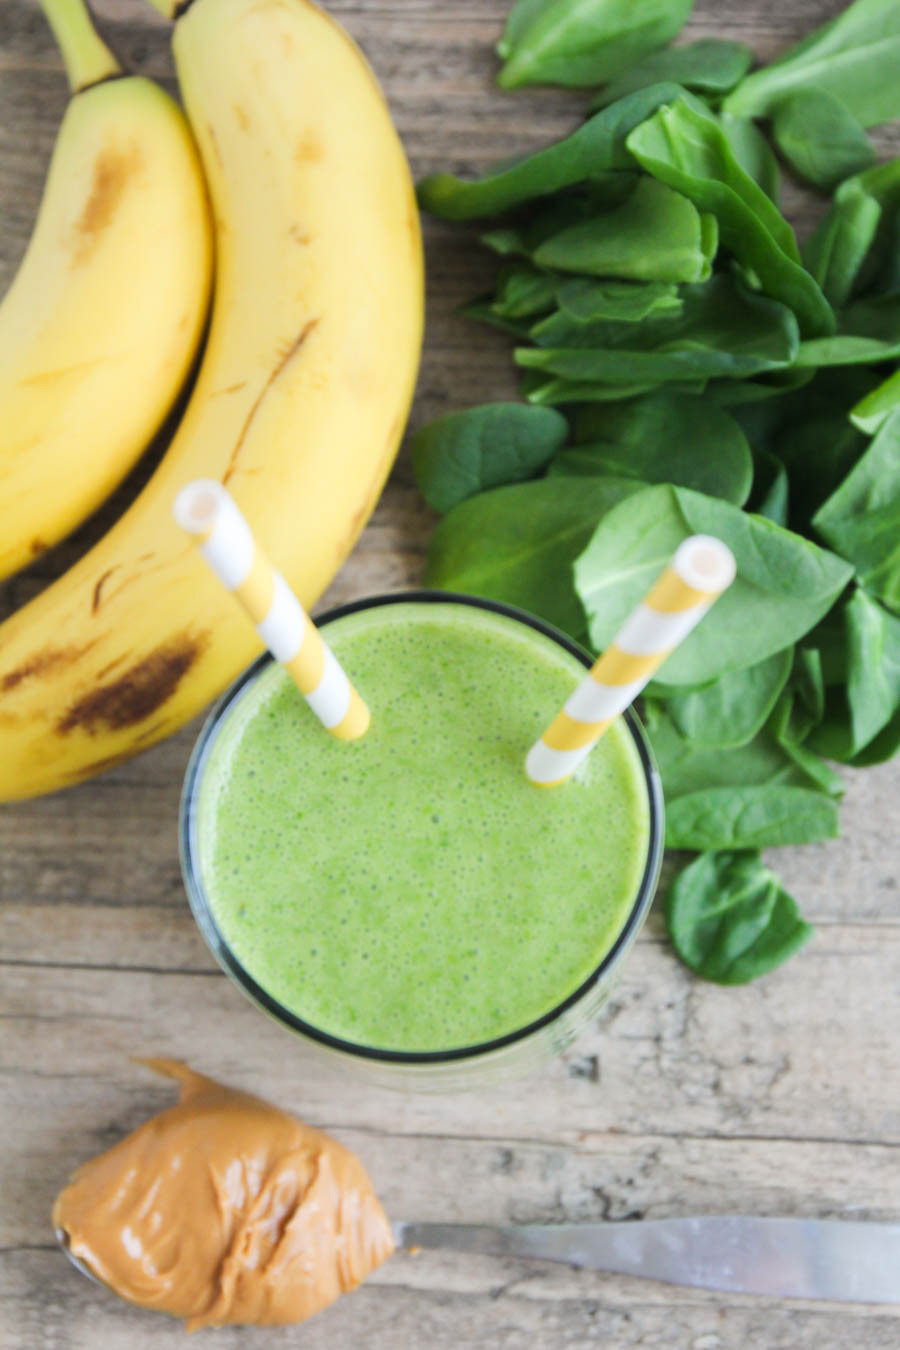 This easy and delicious dairy free green breakfast smoothie is the perfect energizing start to your day!